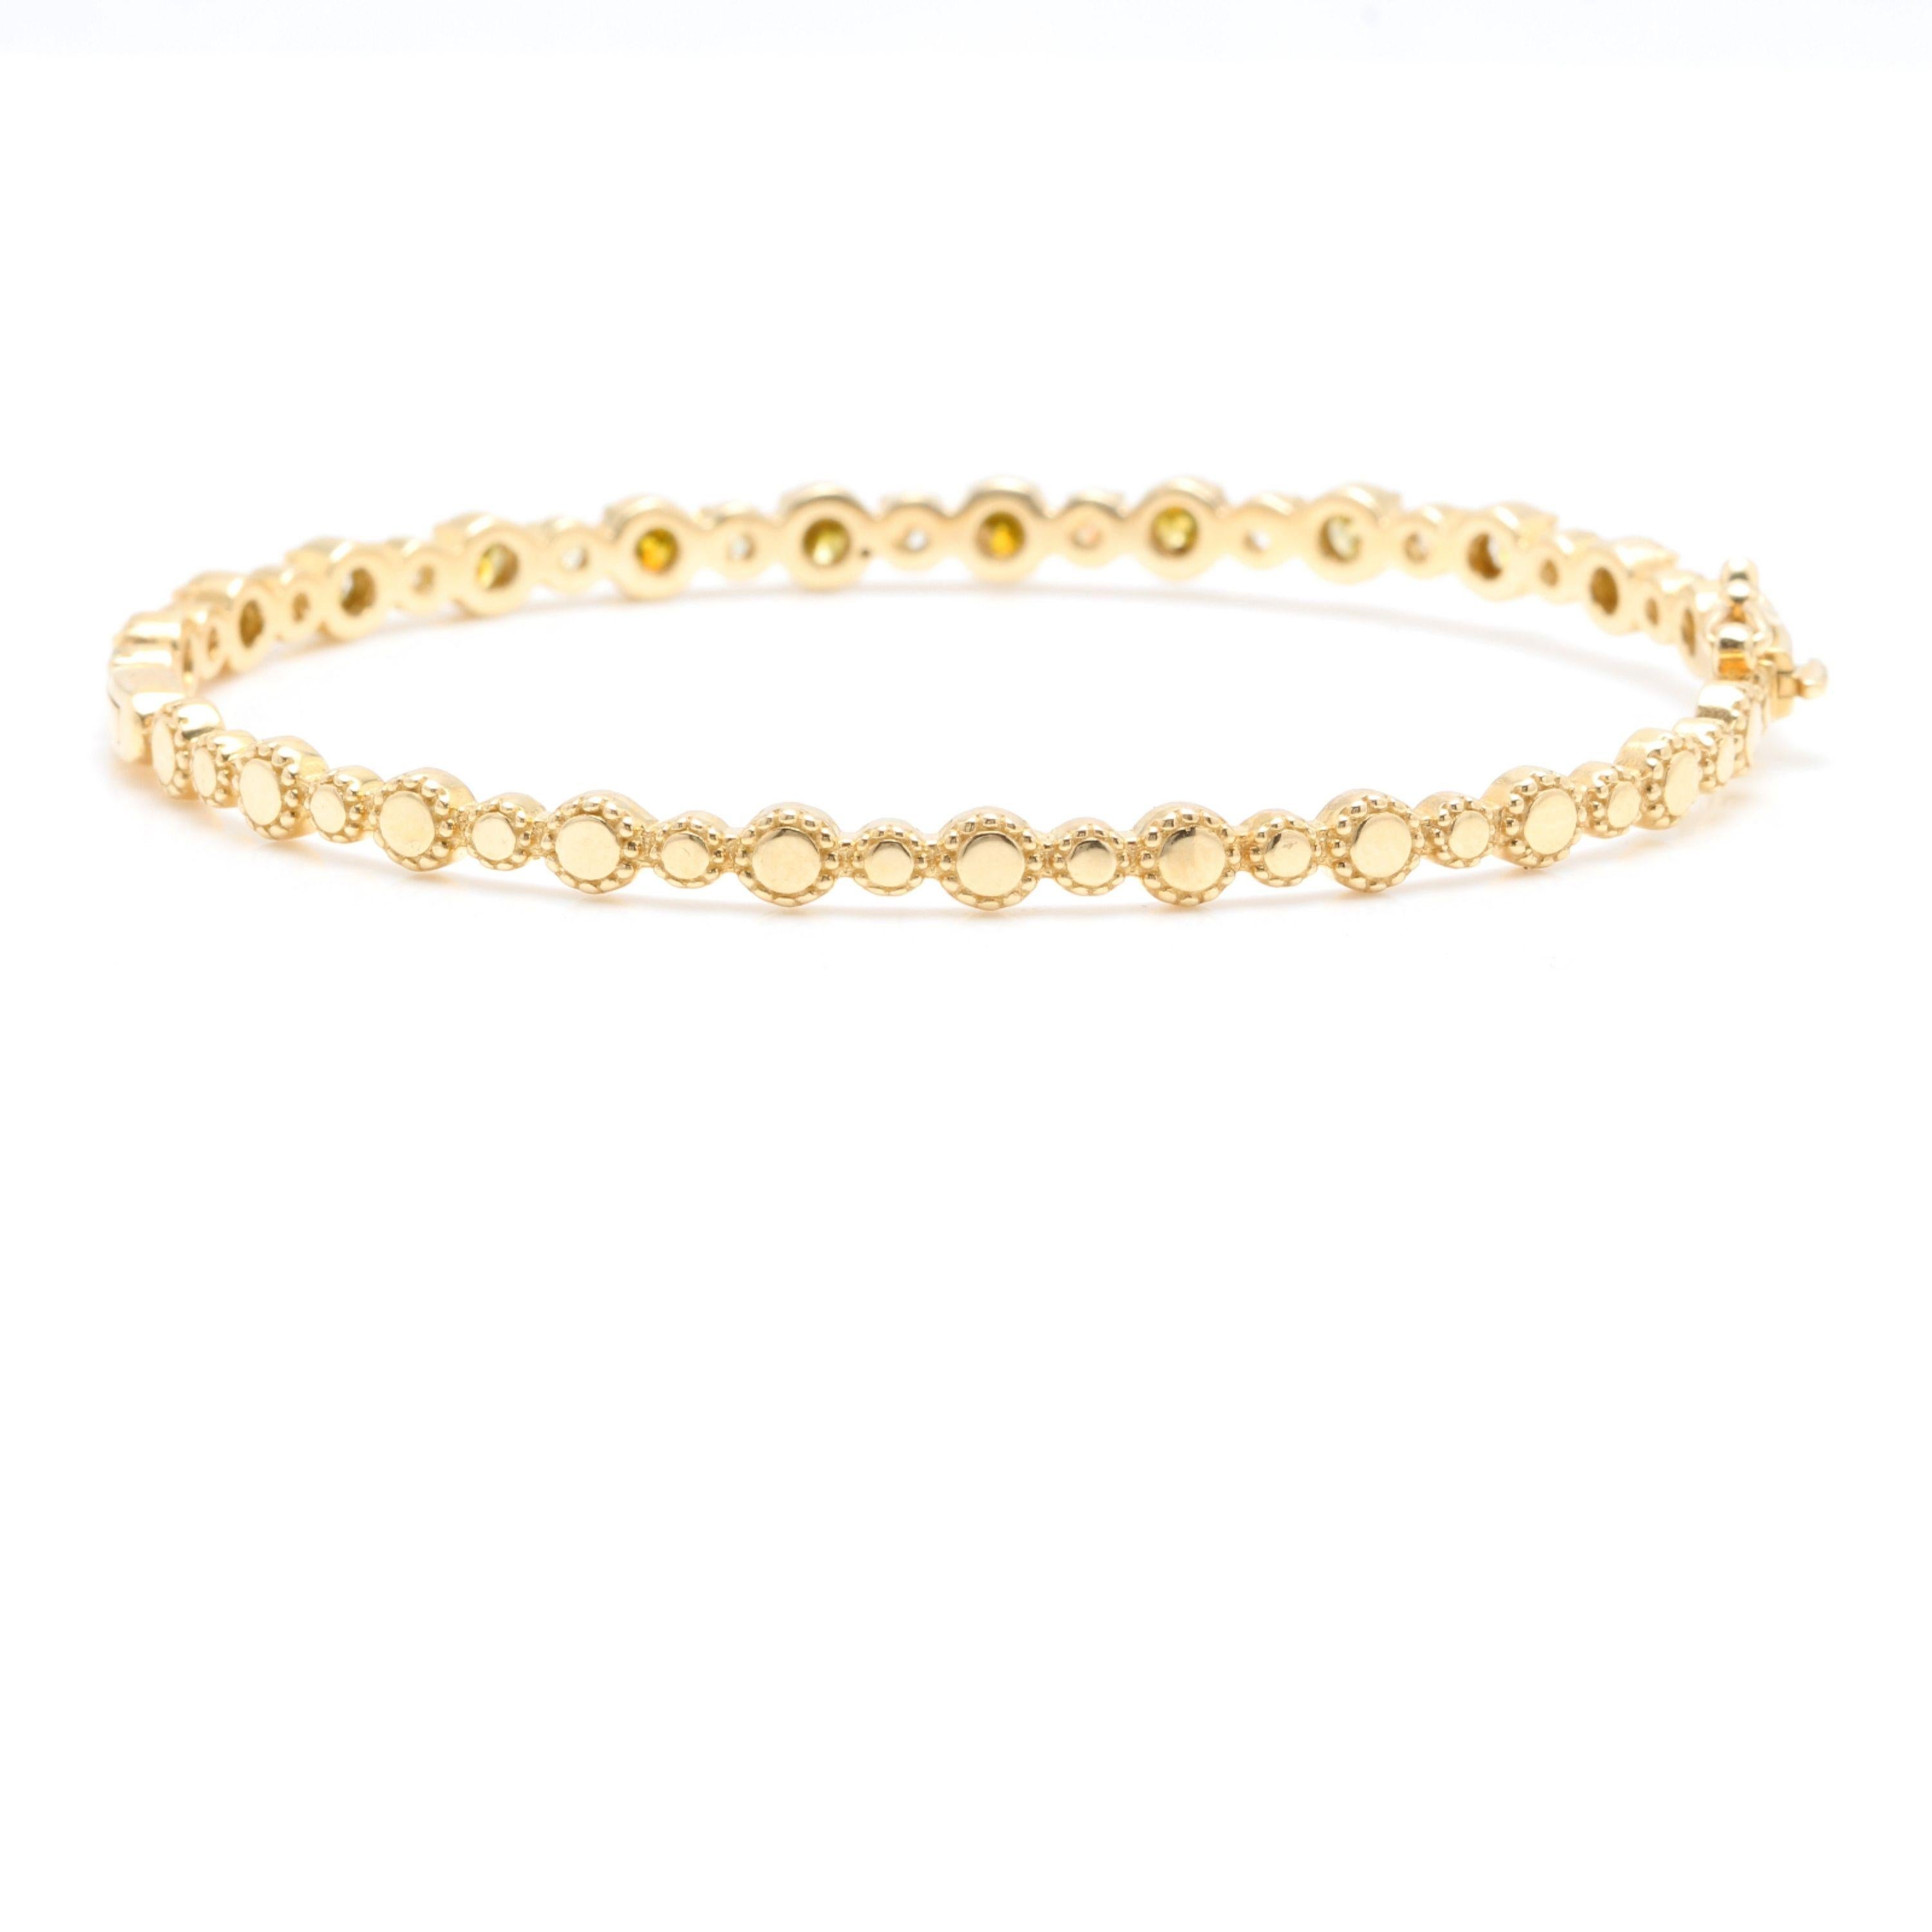 Very Impressive 1.84 Carats Natural Fancy Color Diamond 14K Solid Yellow Gold Bangle Bracelet

STAMPED: 14K

Total Natural Fancy Yellow Round Diamonds Weight: Approx. 1.84 Carats ( Color Enhanced / Clarity SI1-SI2)

Bangle Wrist Size is: 7